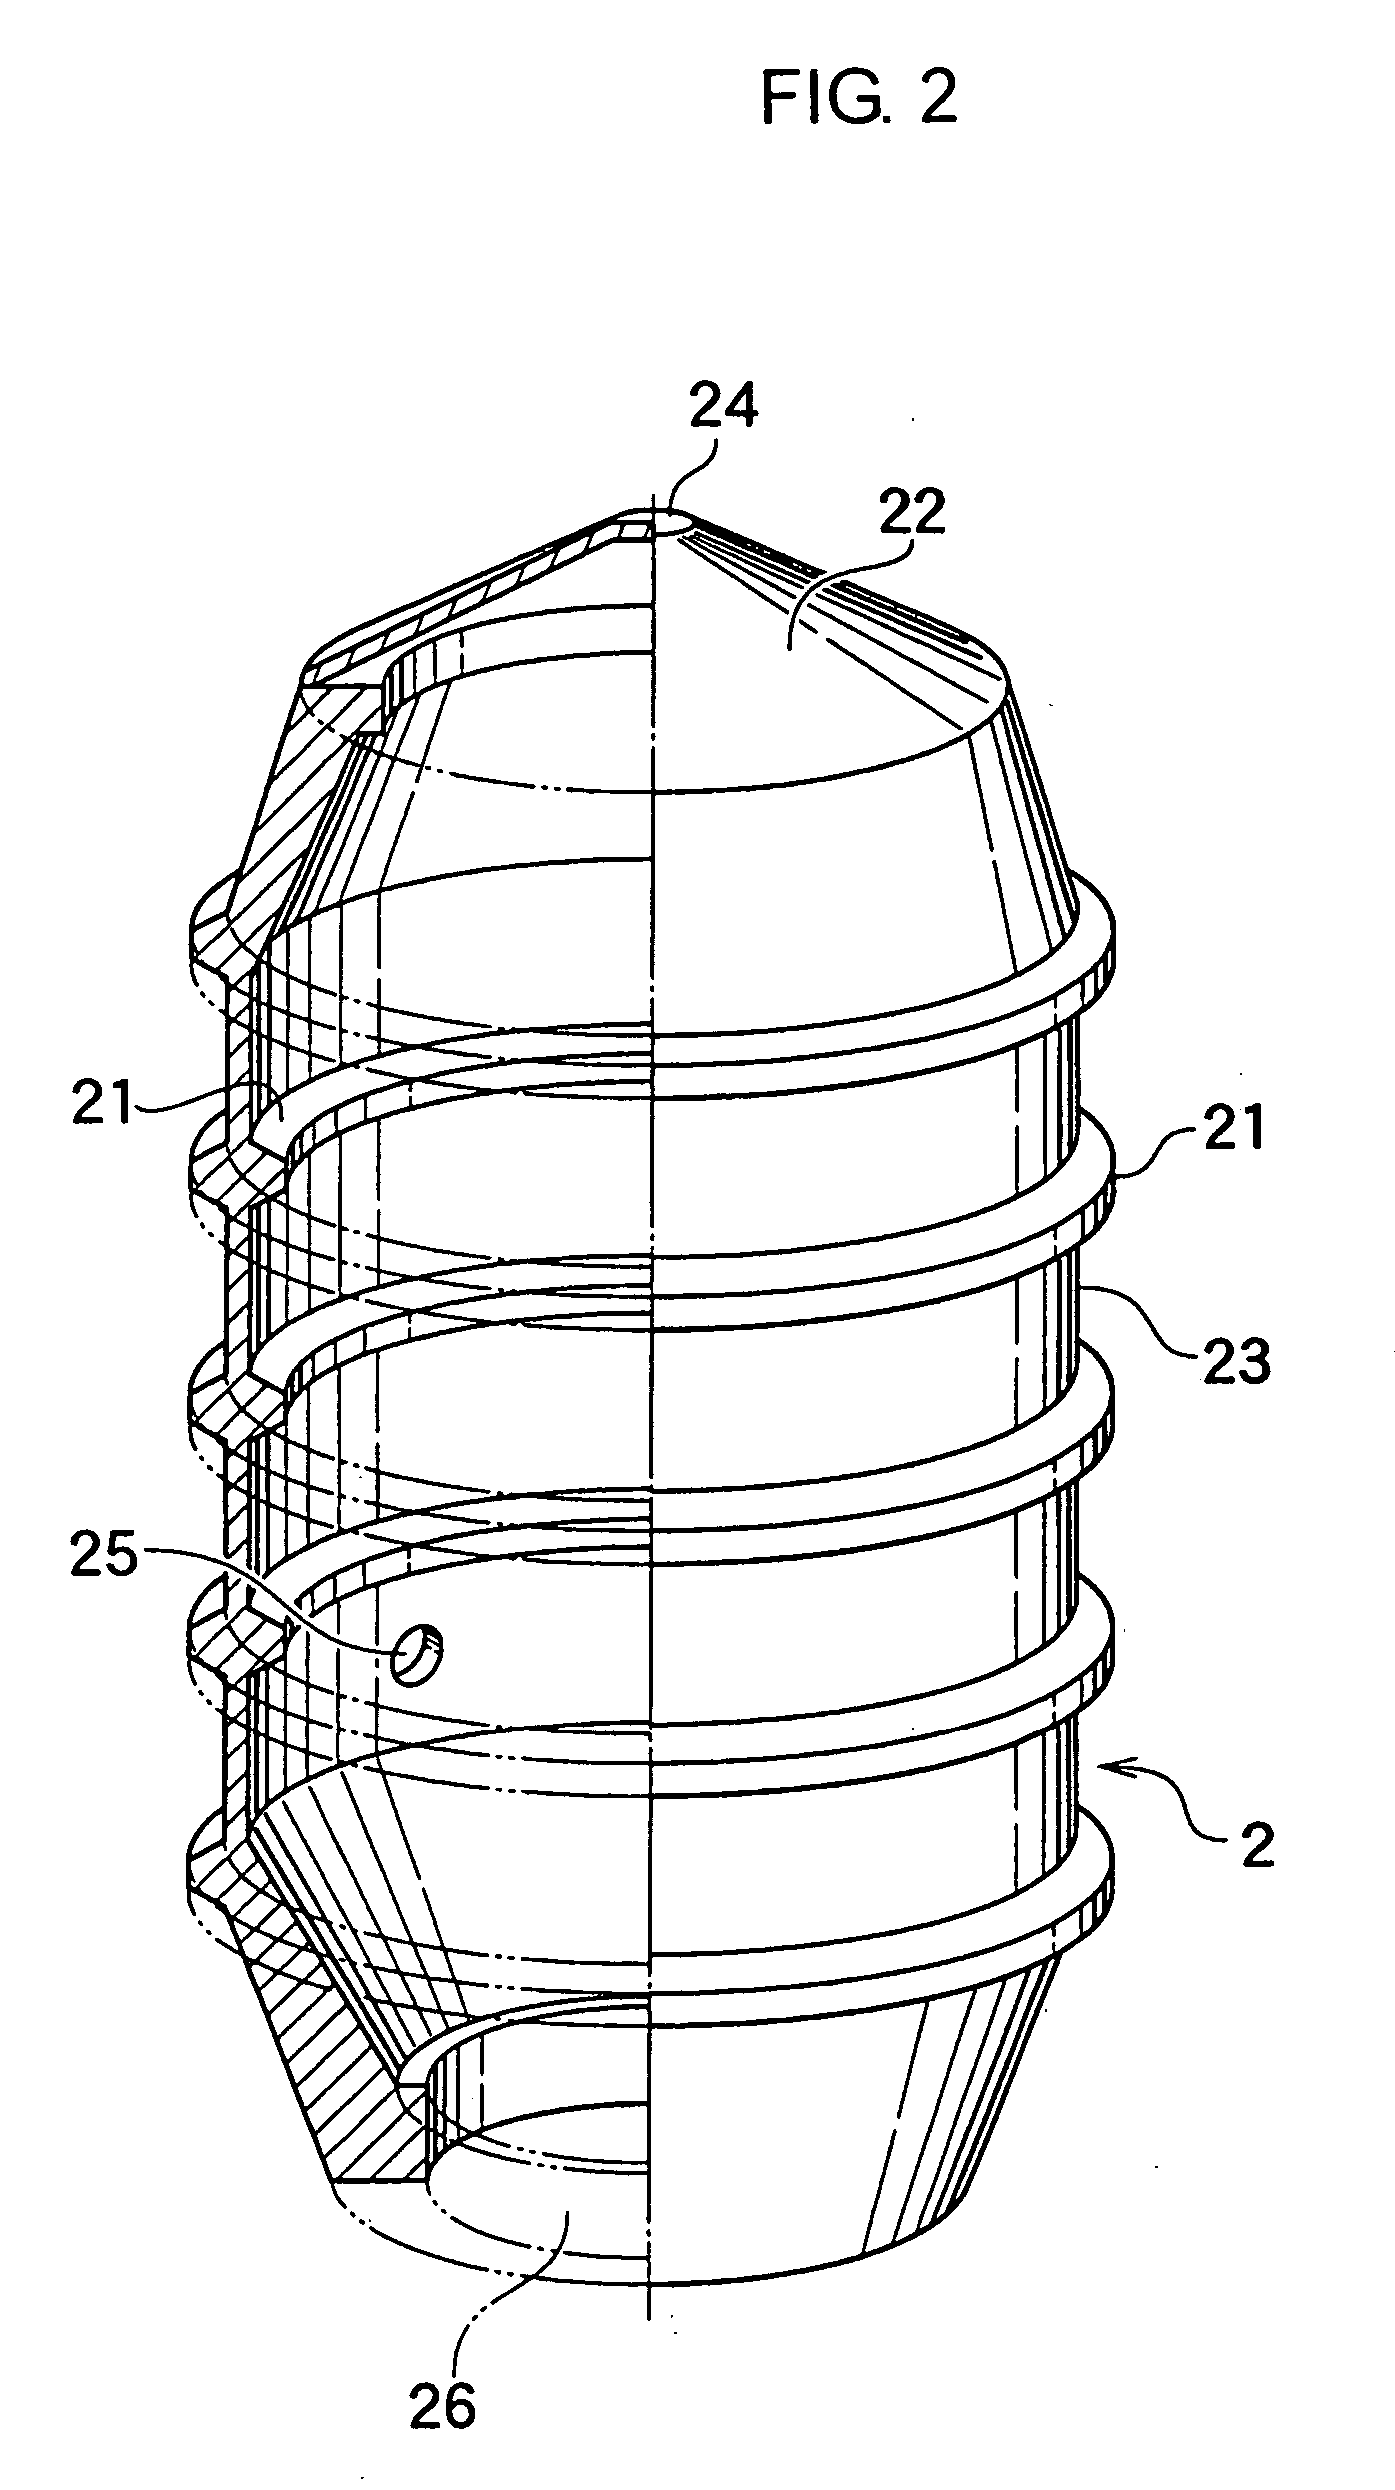 Structure of pile head joint portion and pile head fitting tubular body